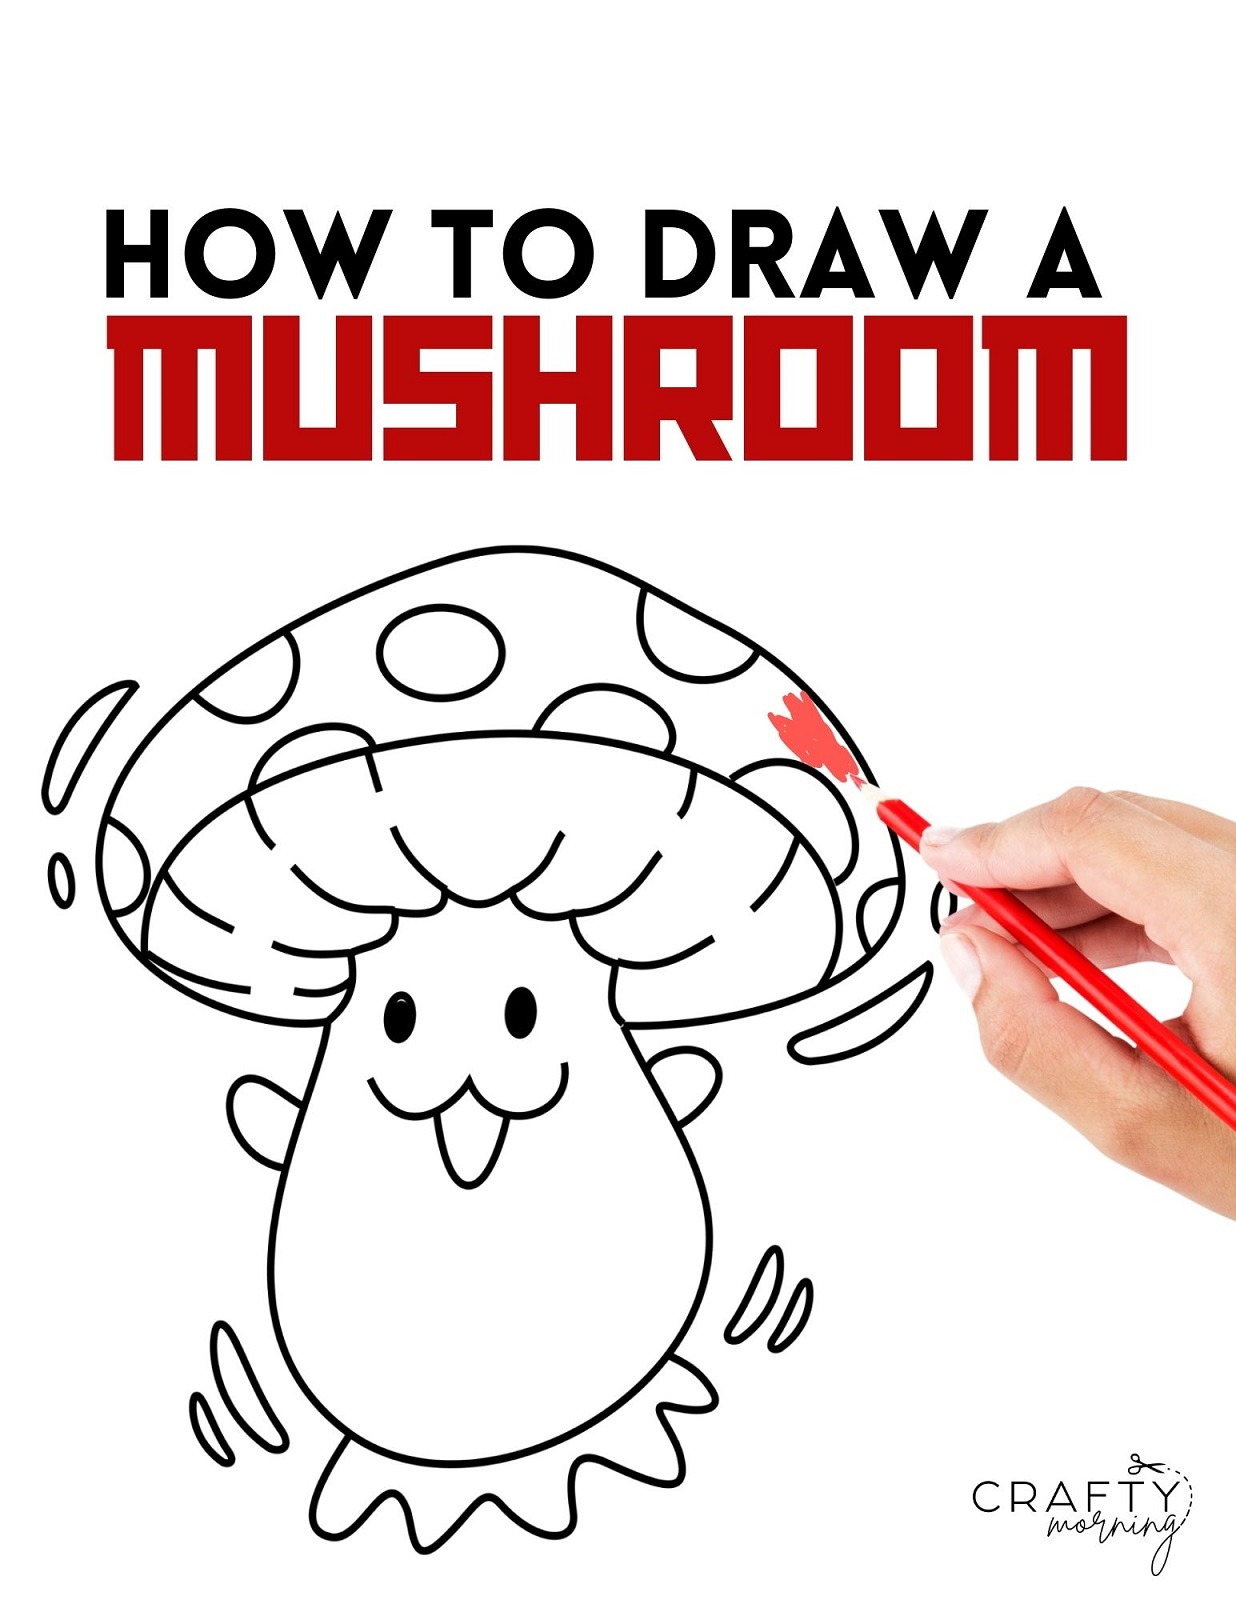 Mushroom Drawing and Coloring Painting For Kids I How To Draw A Mushroom -  YouTube